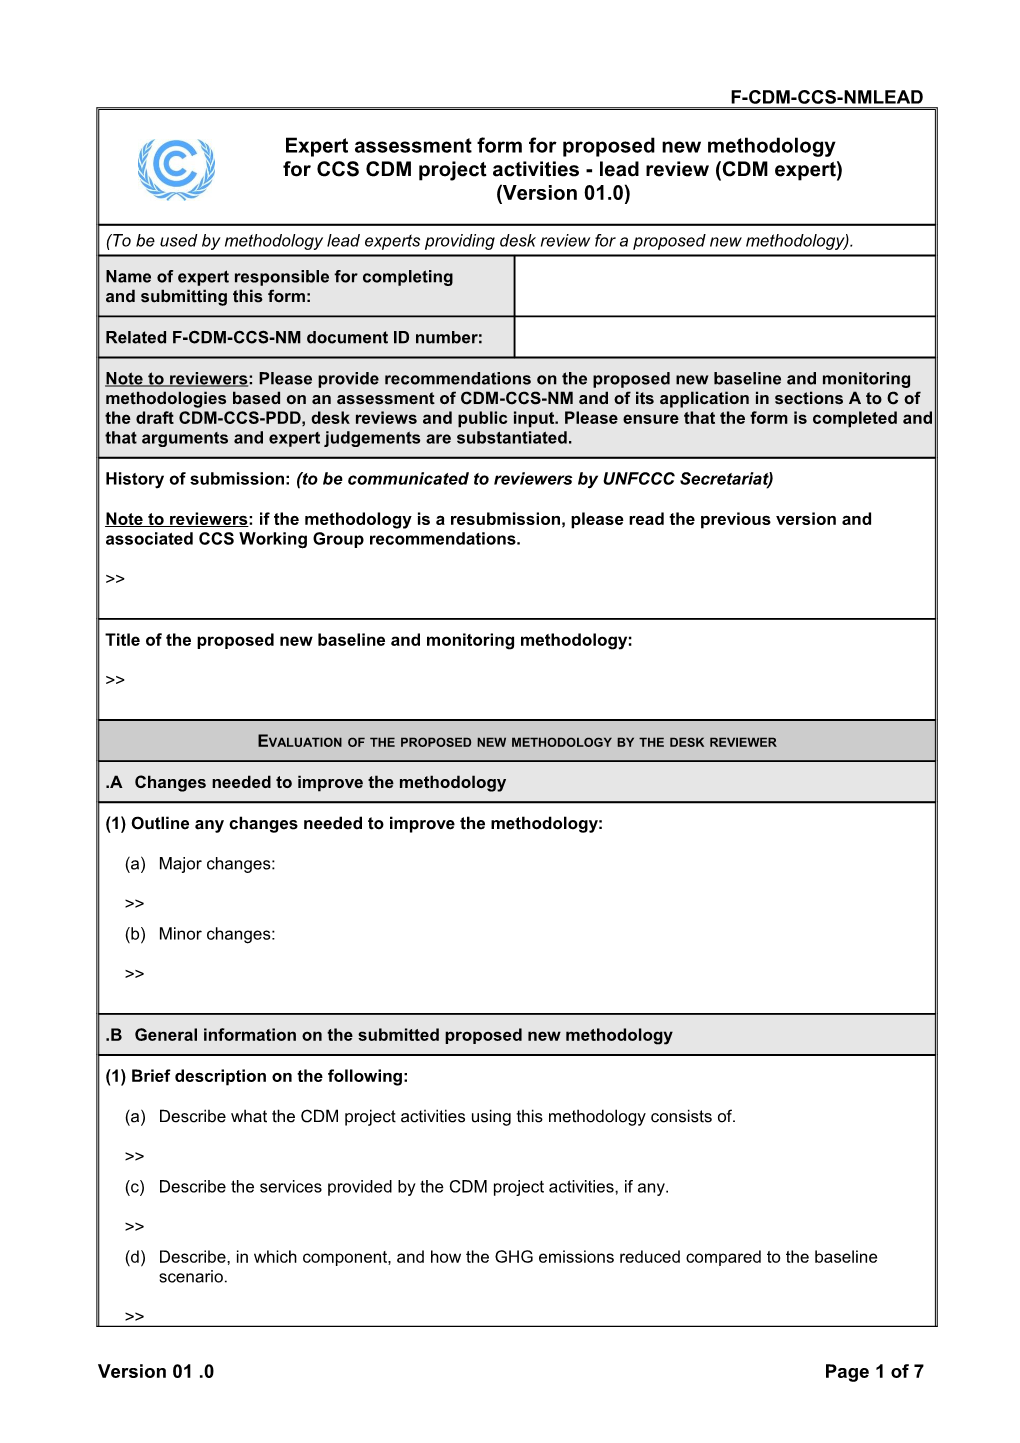 F-CDM-CCS-NMLEAD: Expert Assessment Form for Proposed New Methodology for CCS CDM Project